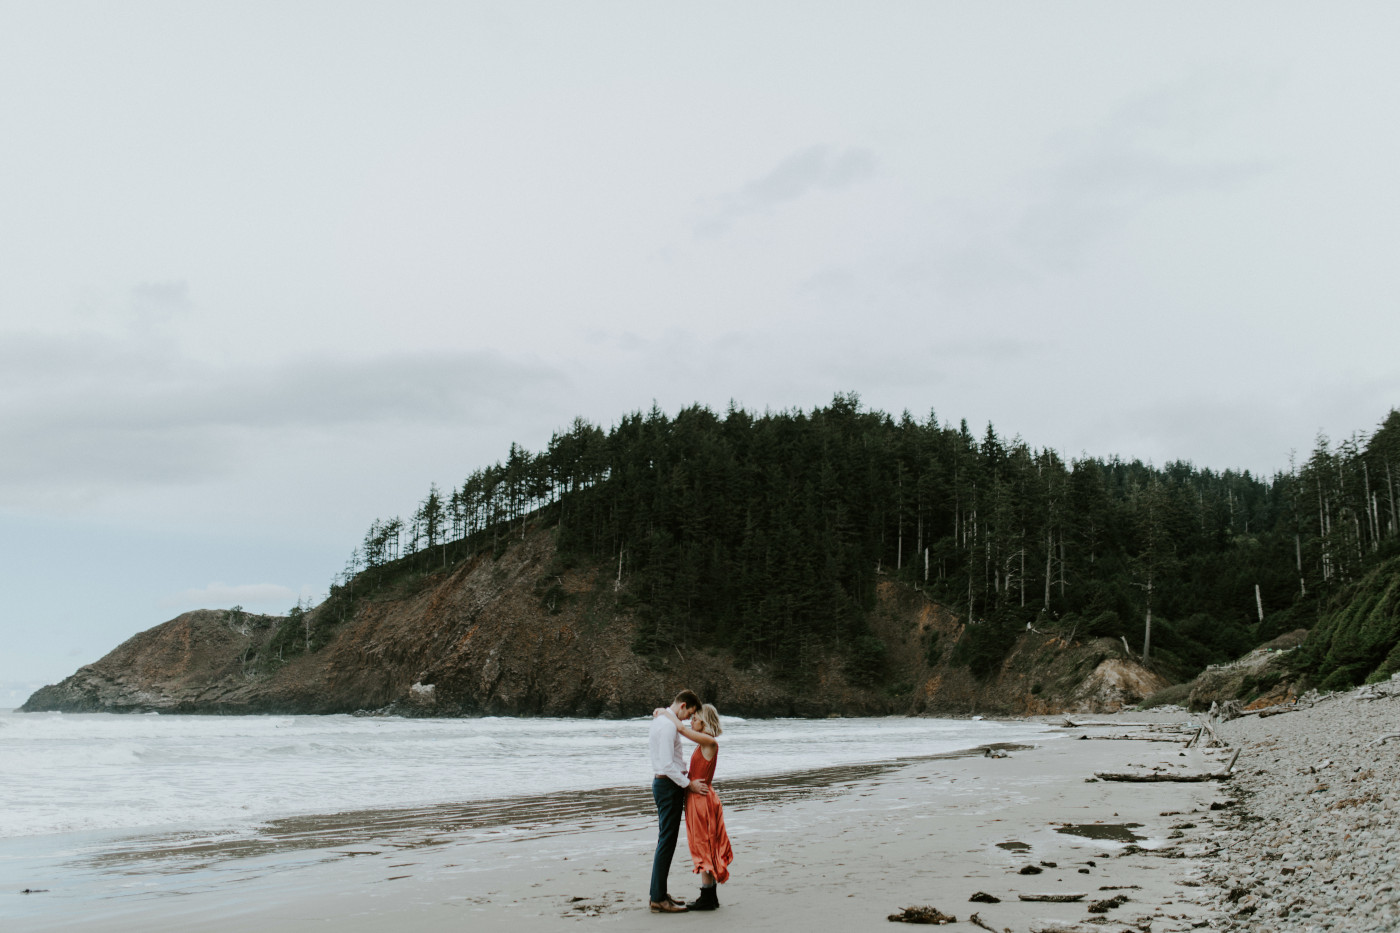 Billy and Chelsey stand together alone at Cannon Beach. Elopement wedding photography at Cannon Beach by Sienna Plus Josh.